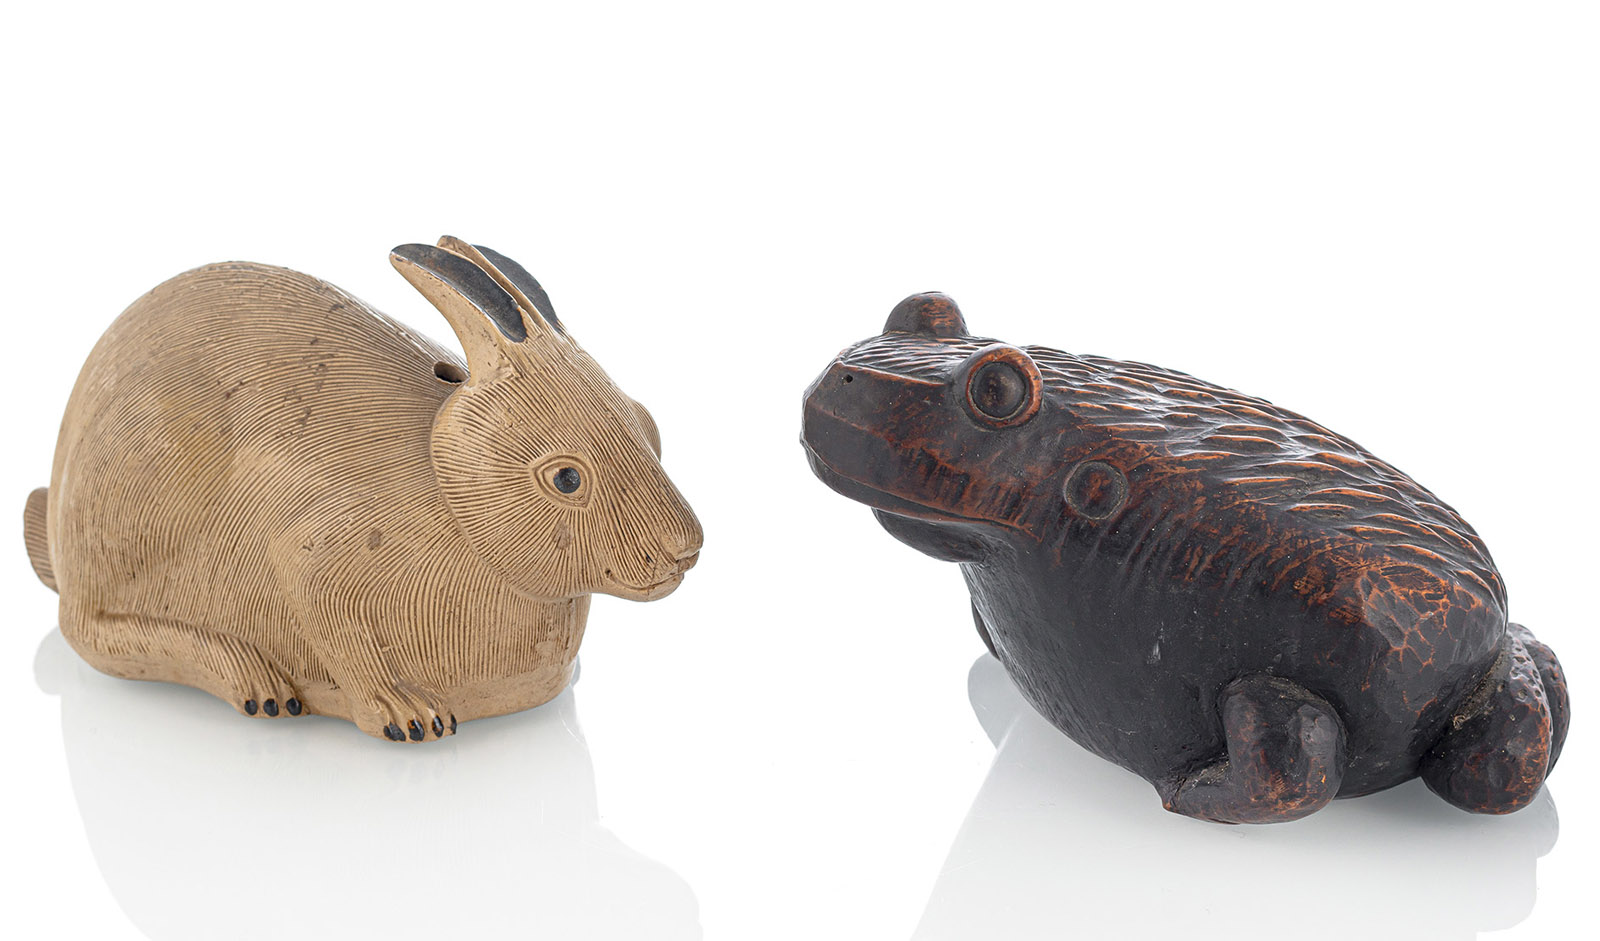 <b>TWO WOOD AND BIZEN WARE SCULPTURES OF A RABBIT AND A TOAD</b>